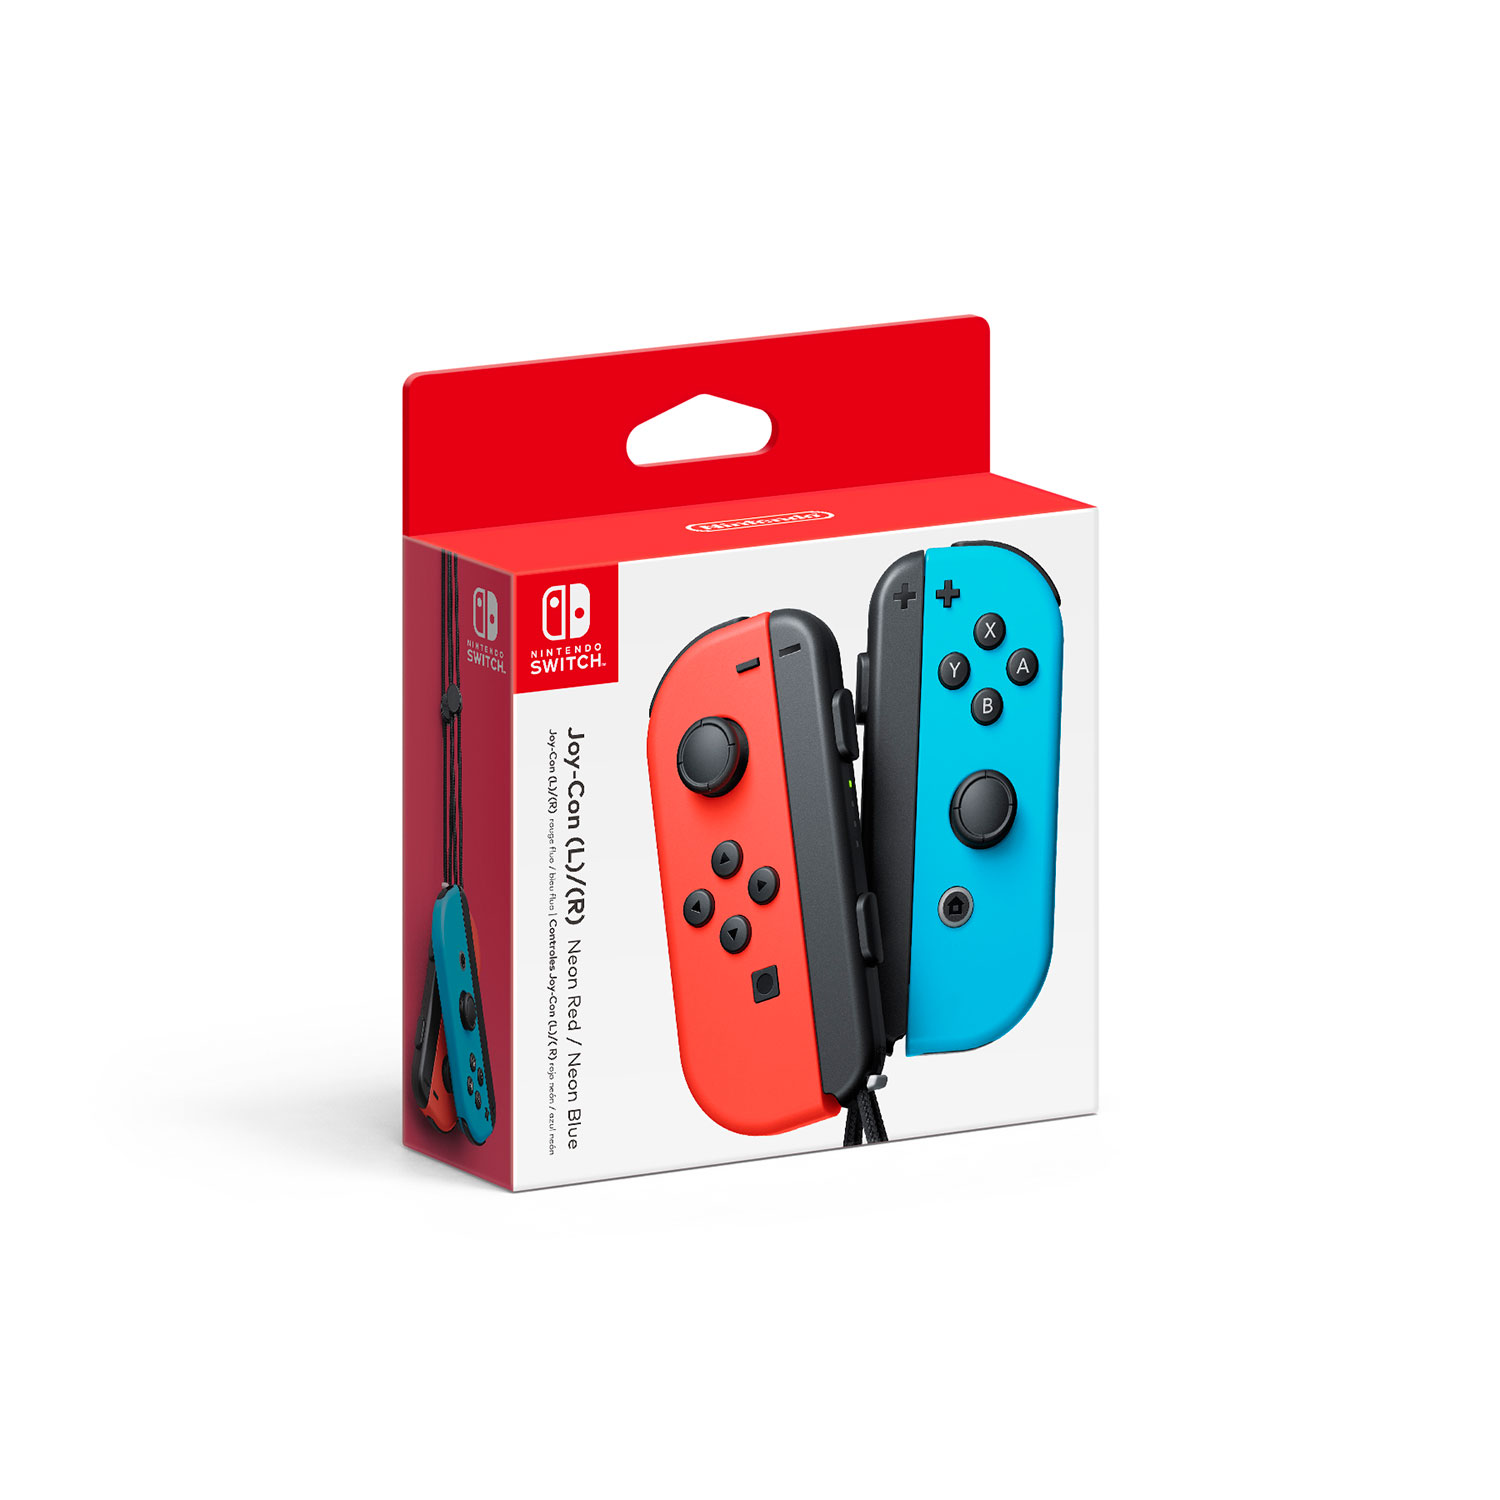 Nintendo Switch Left and Right Joy-Con Controllers - Neon Red/Neon